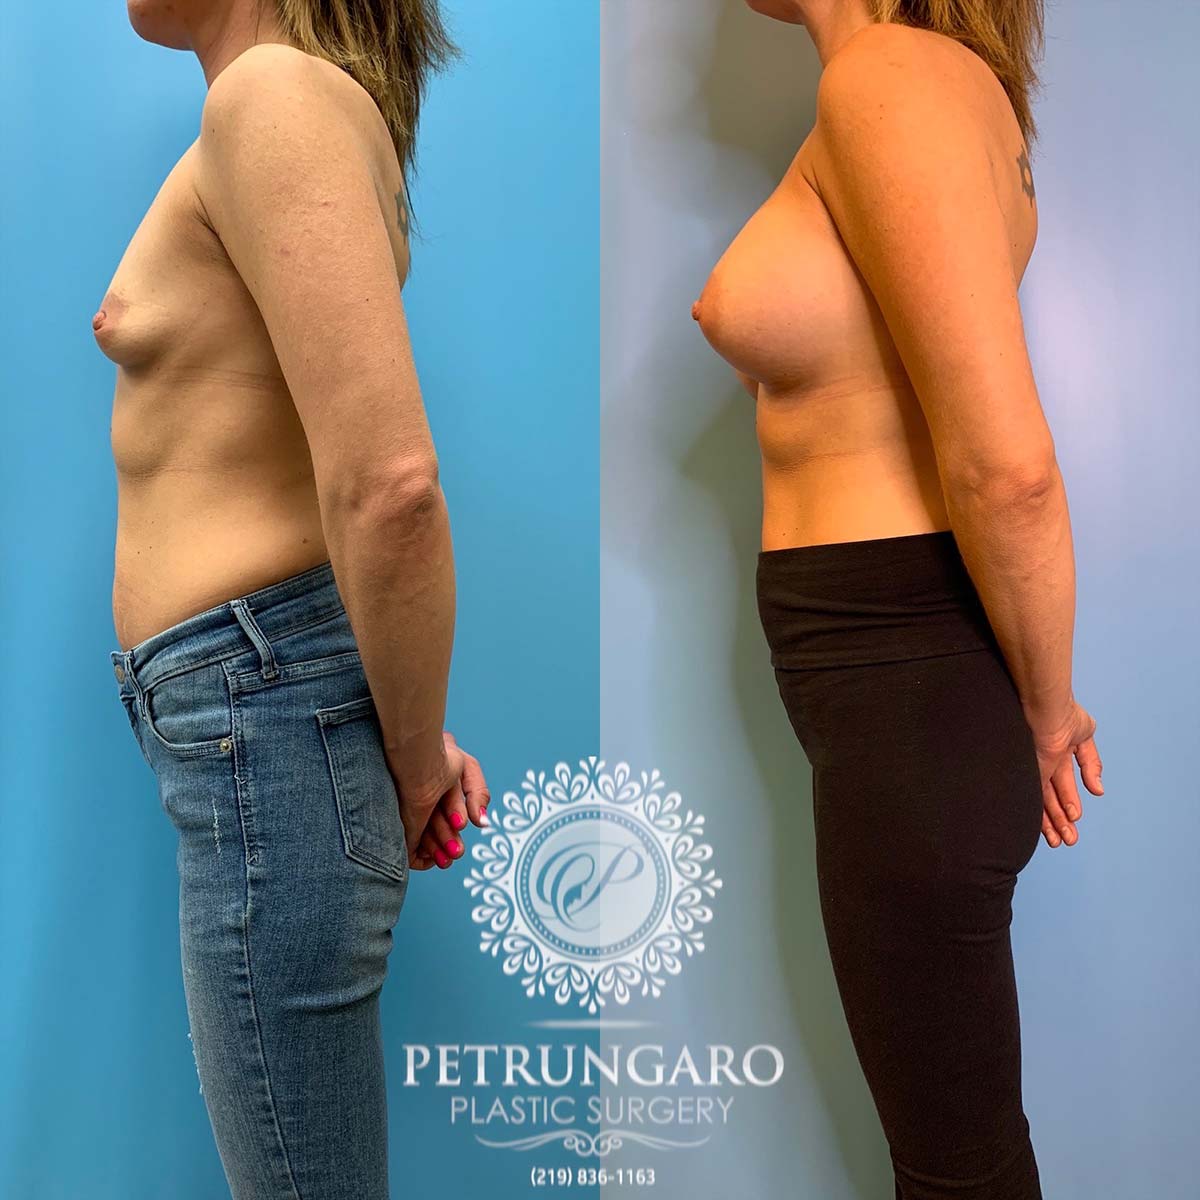 37 year old woman 3 months after breast augmentation-2